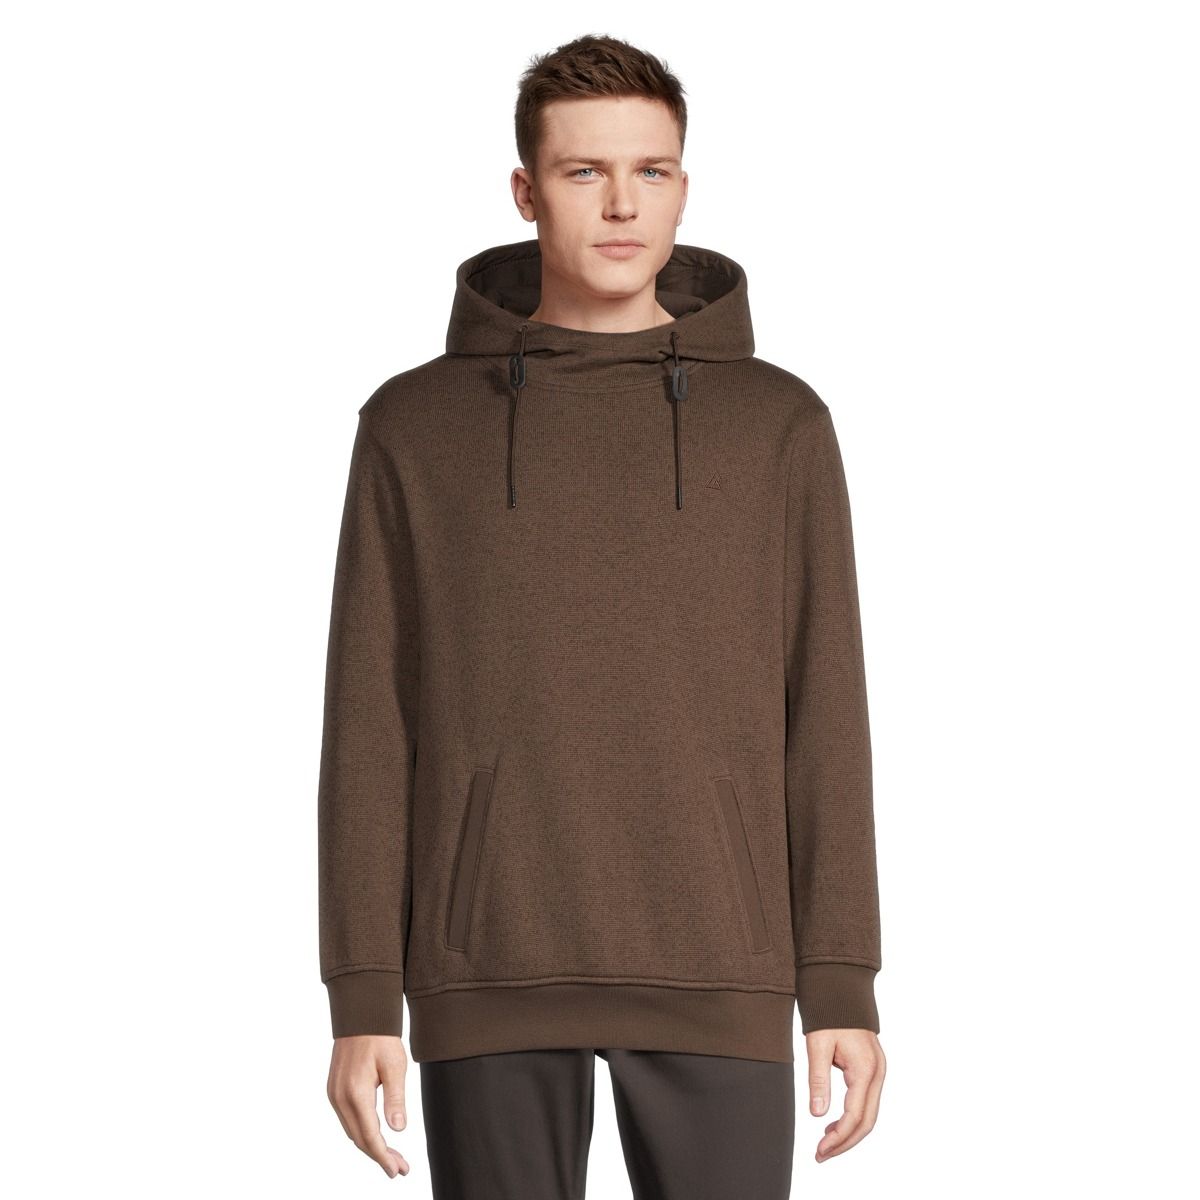 Ripzone Men's Cliff Pullover Hoodie